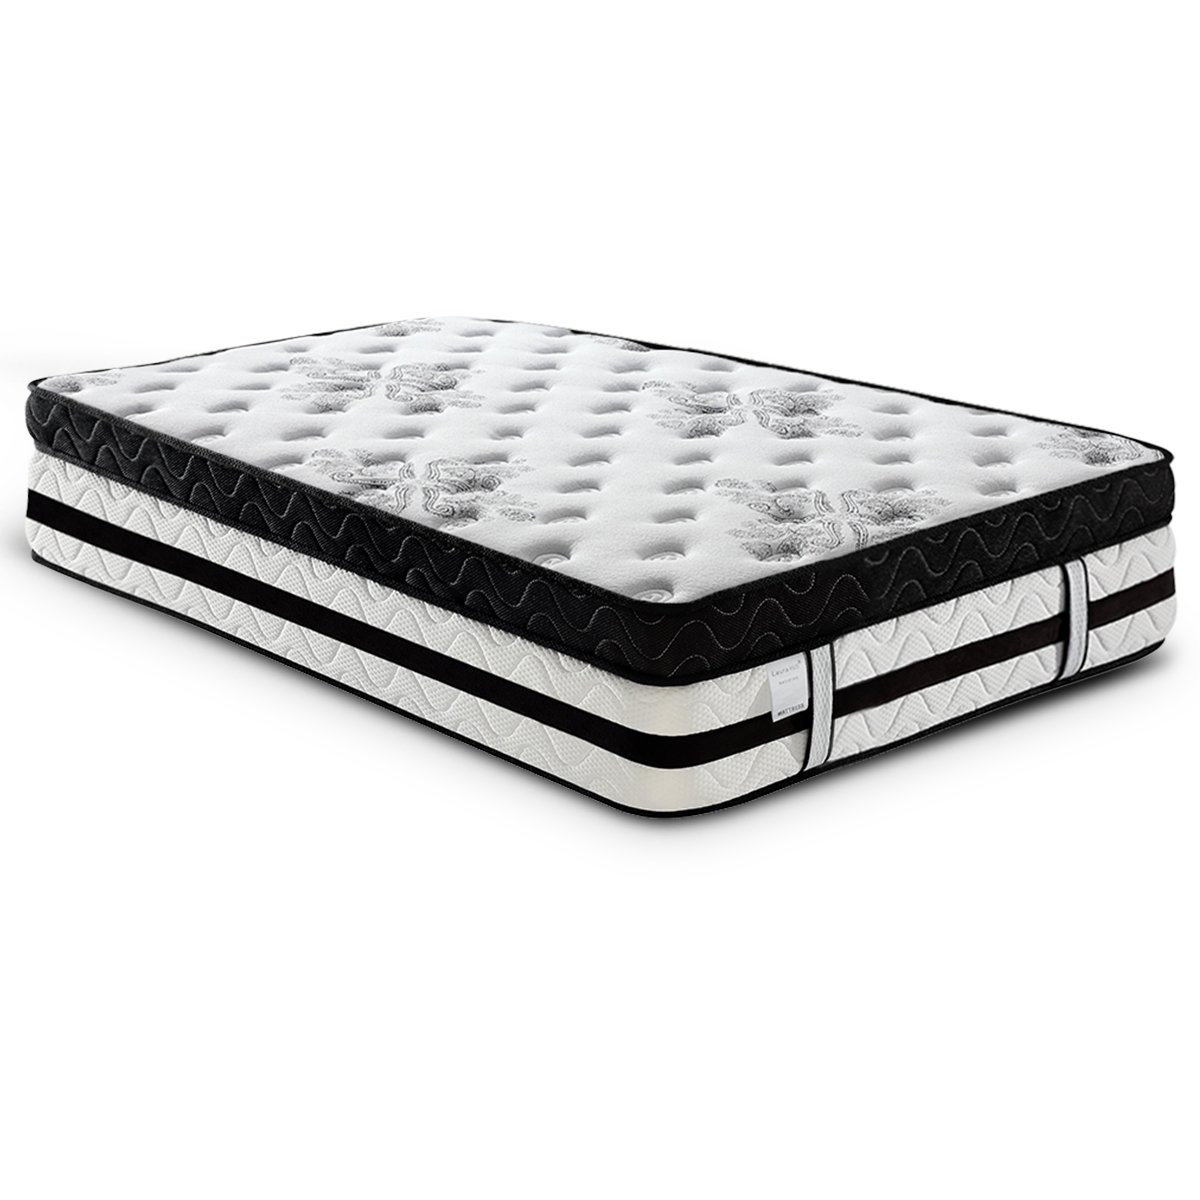 Laura Hill Double Mattress with Euro Top - 34cm 1